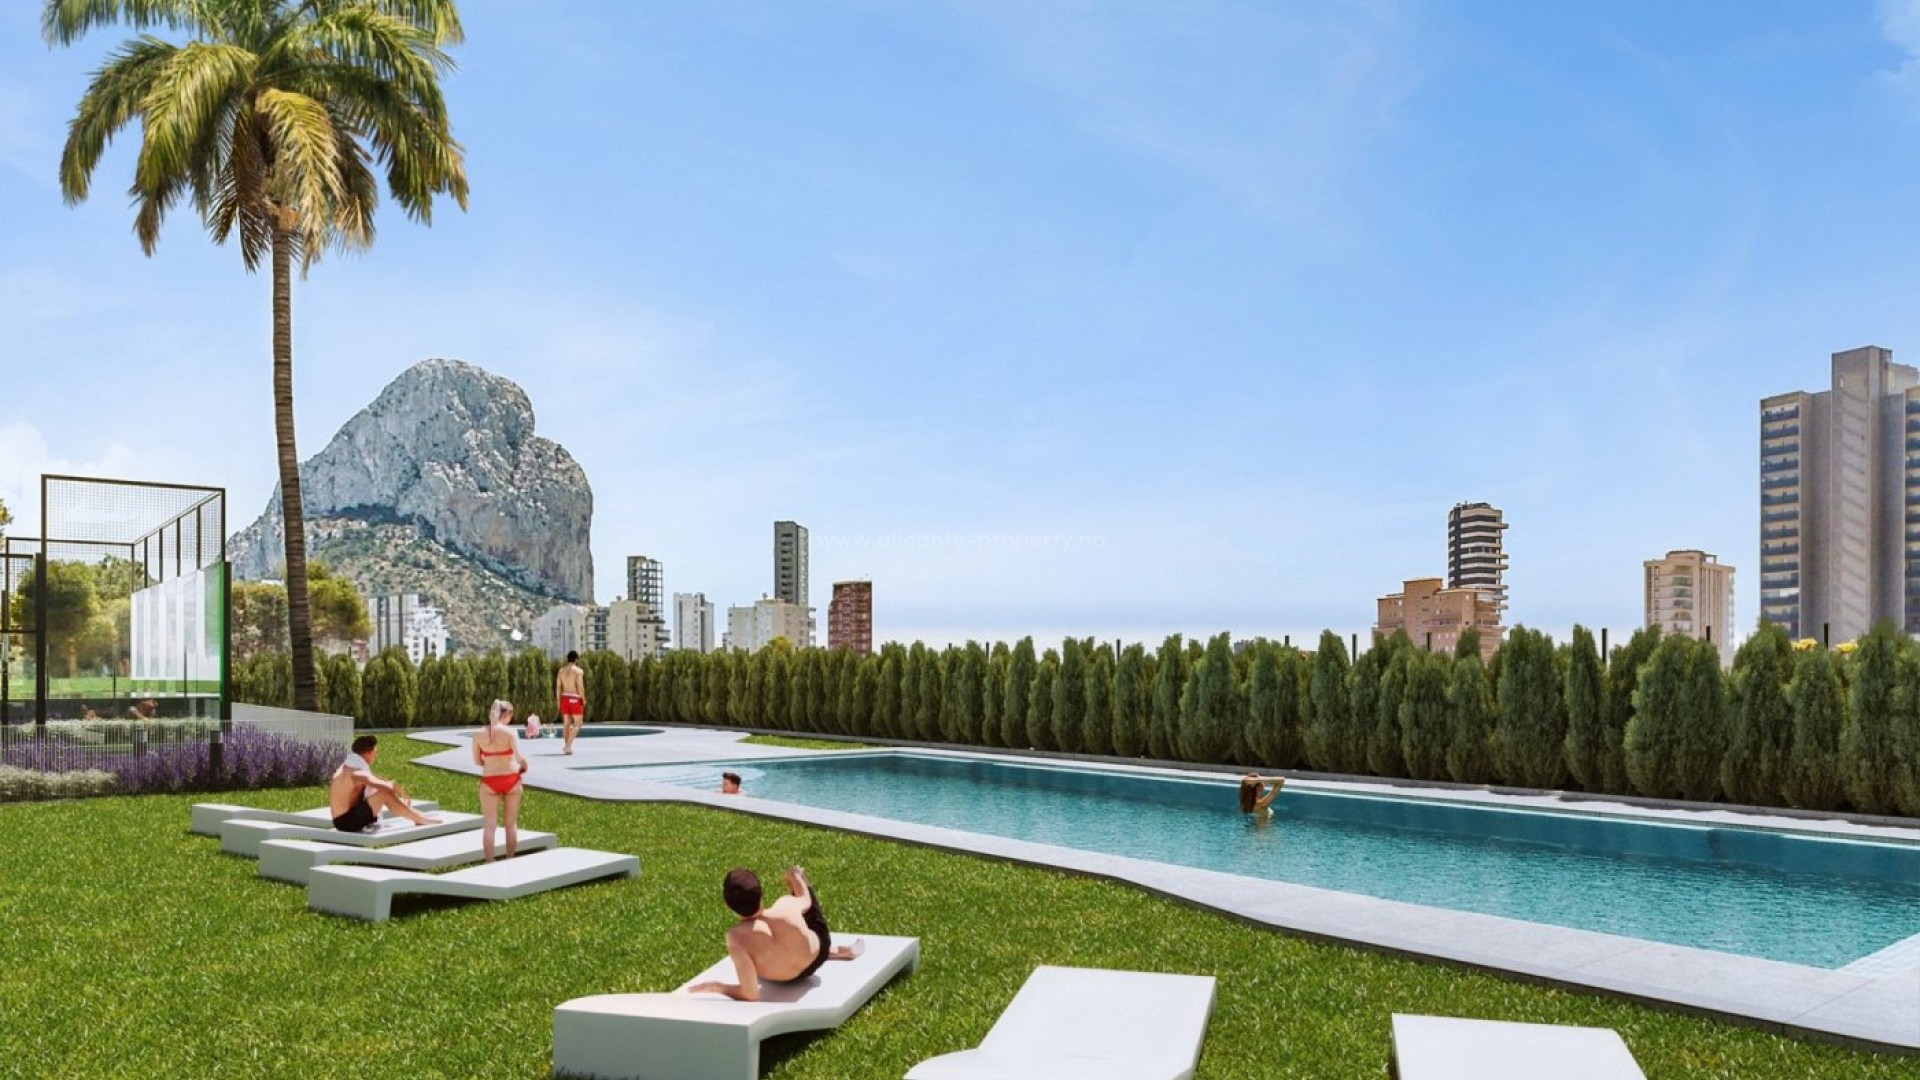 Luxury penthouse in Calpe, 3 bedrooms, 2 bathrooms, private solarium and terrace, close to several beaches, swimming pool and gym